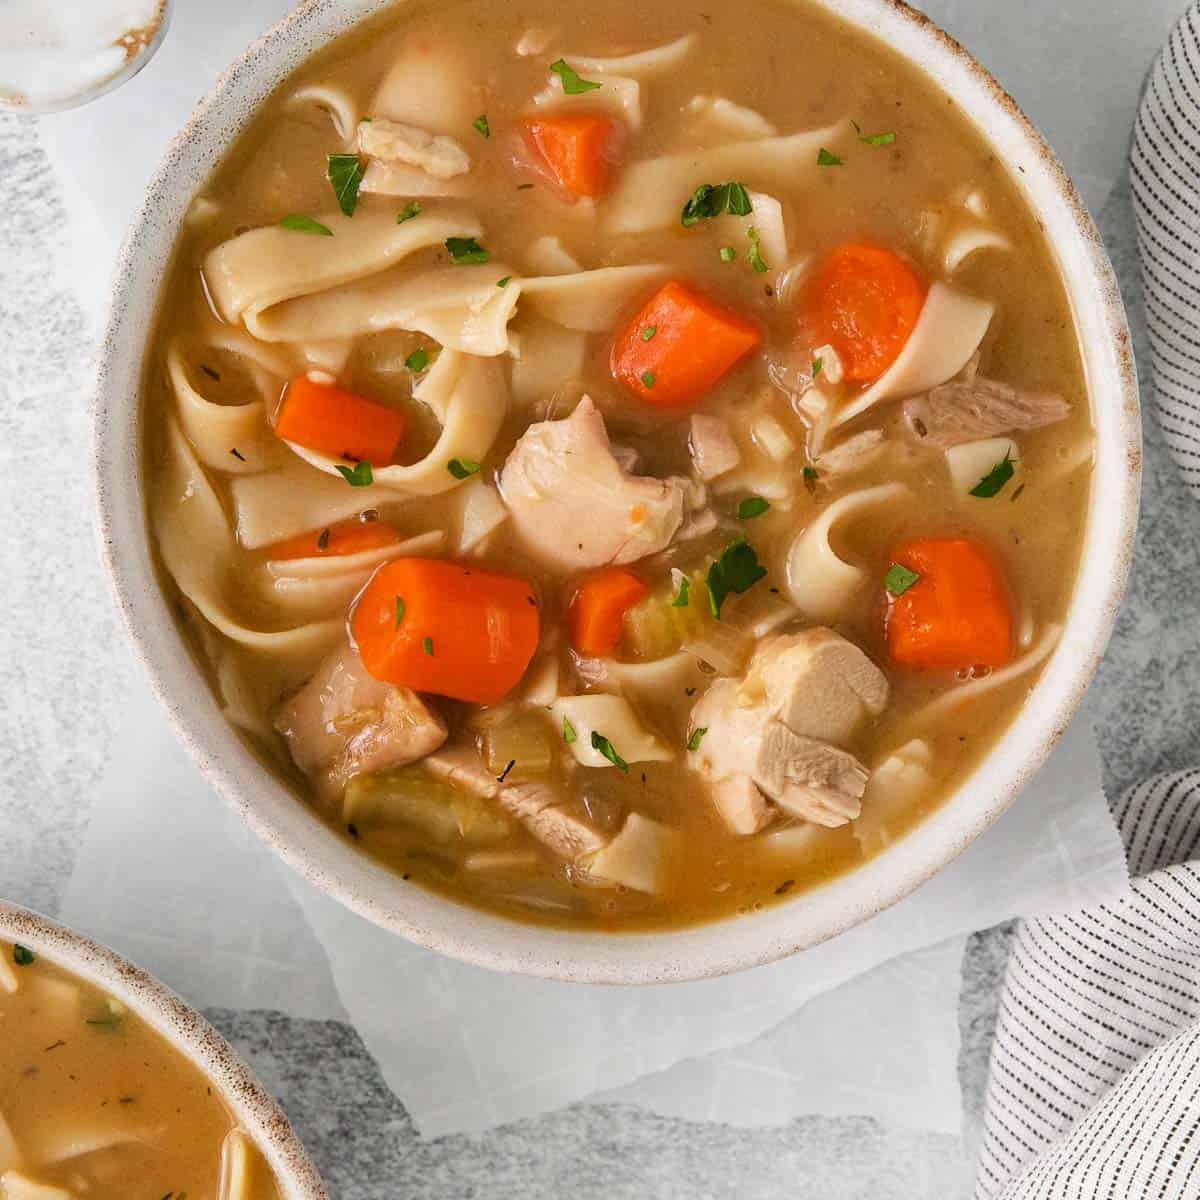 Homemade Gluten Free Chicken Noodle Soup. - The Pretty Bee